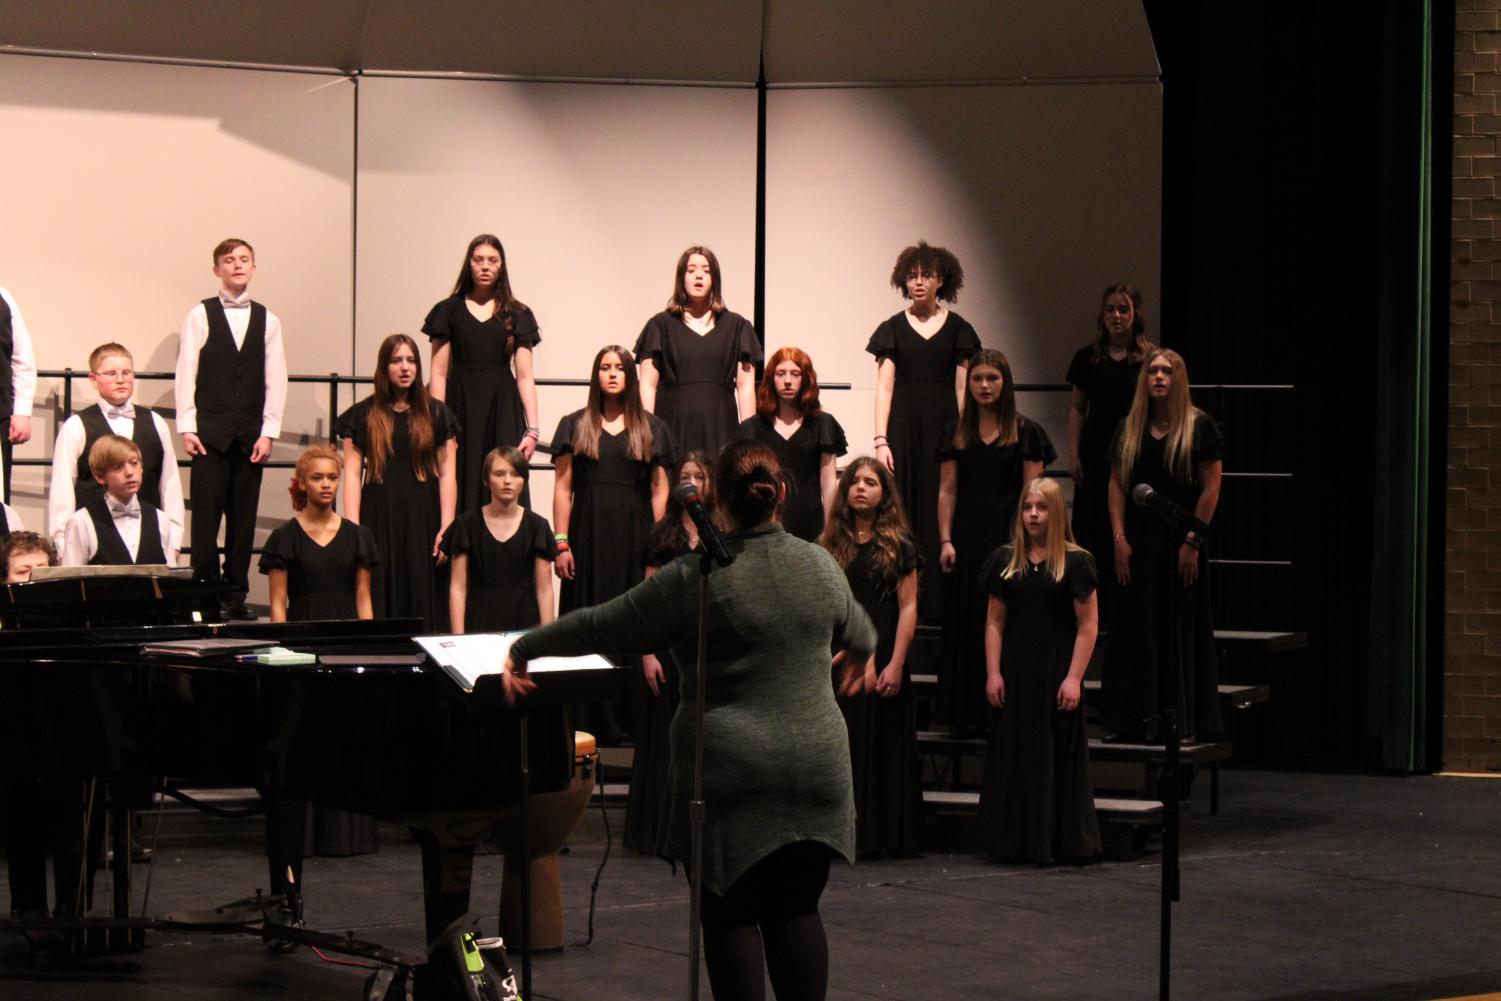 Madrigals+sing+for+Derby+North+choir+students+%28photos+by+Jewel+Hardin%29